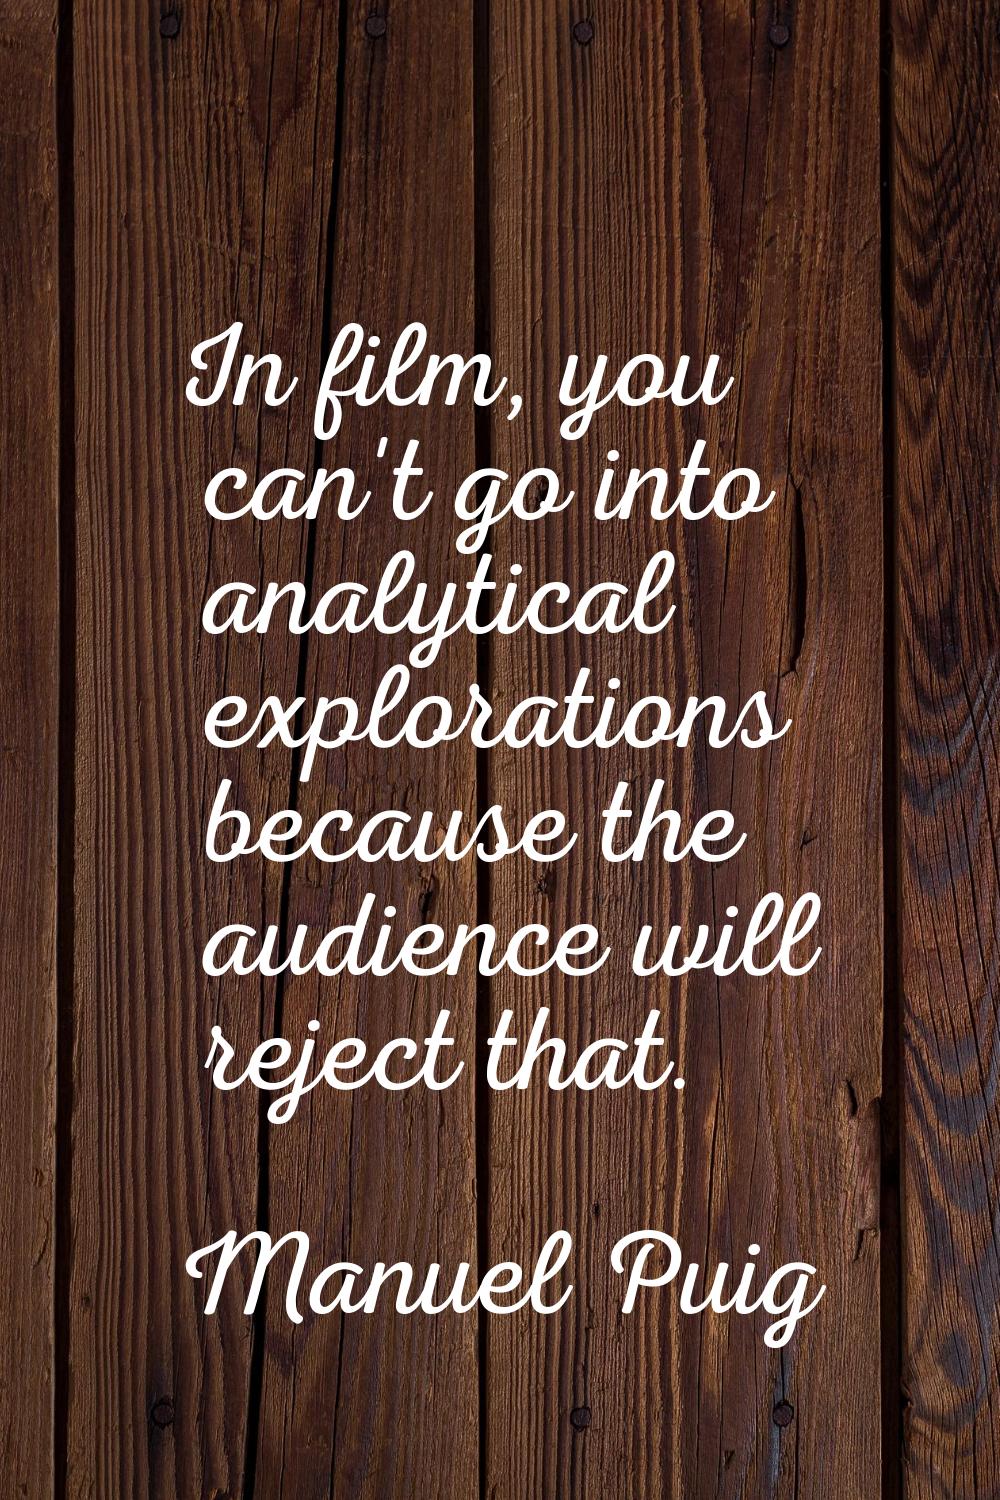 In film, you can't go into analytical explorations because the audience will reject that.